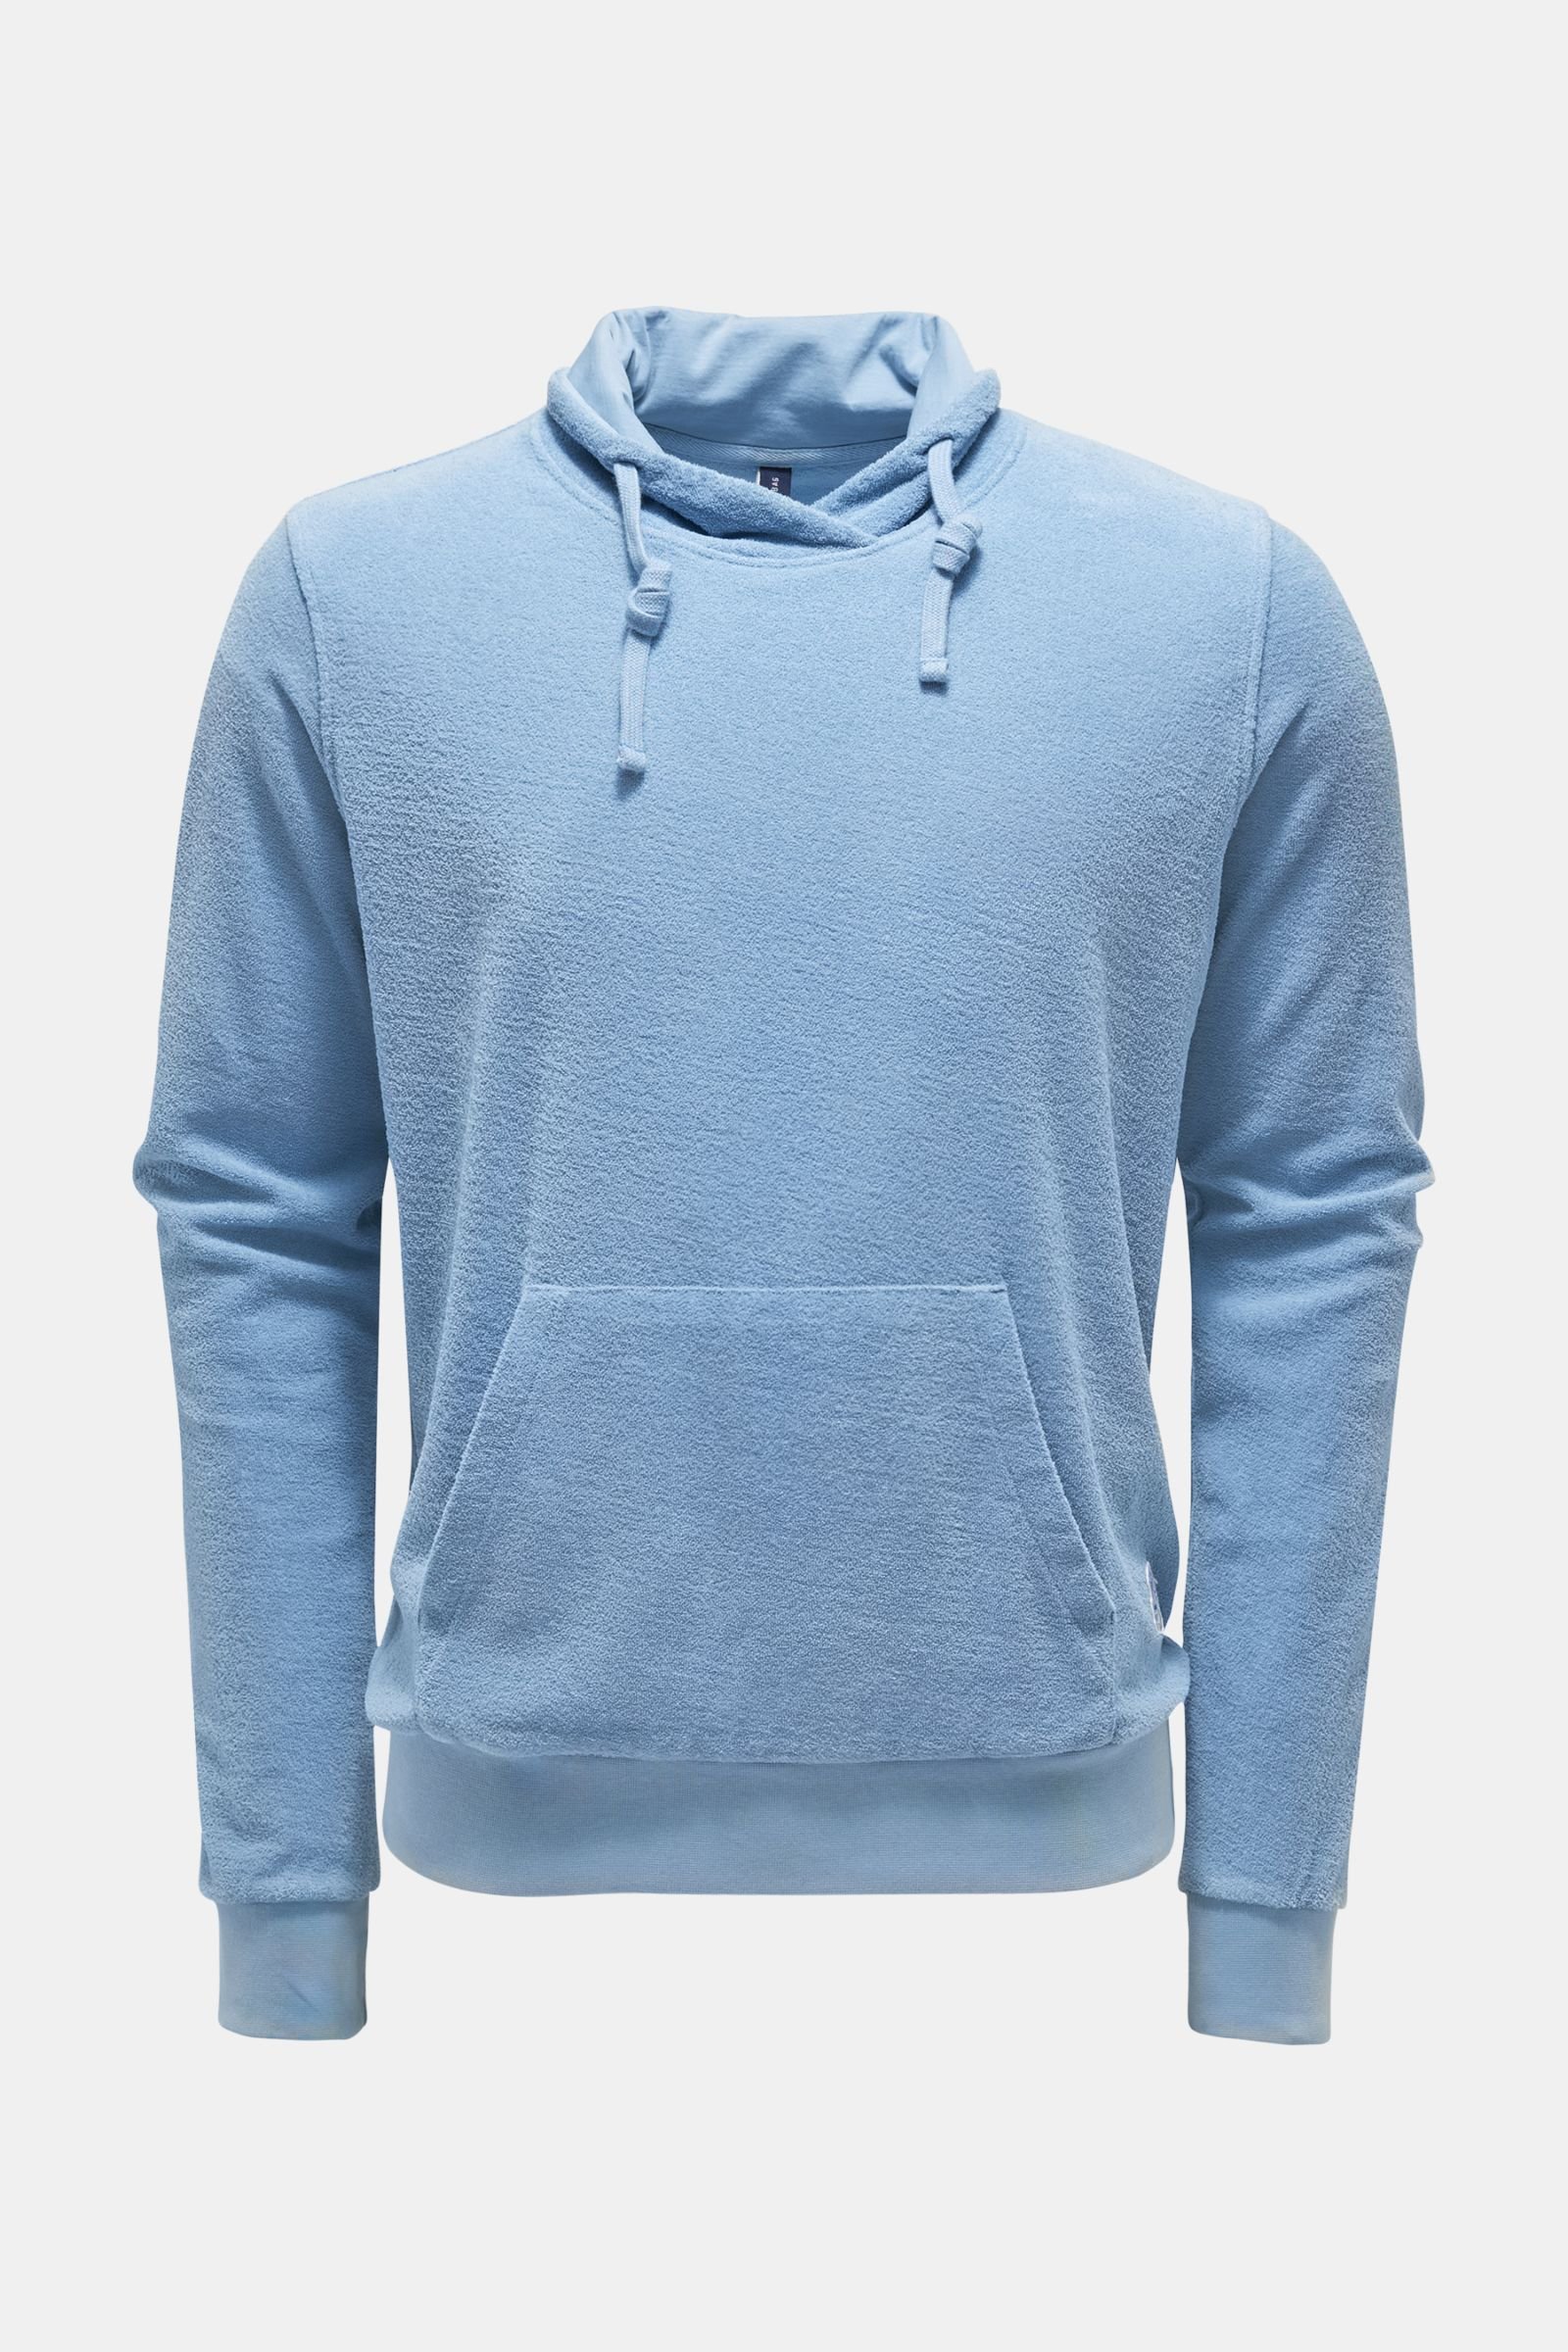 Terry jumper 'Terry Turtle' light blue